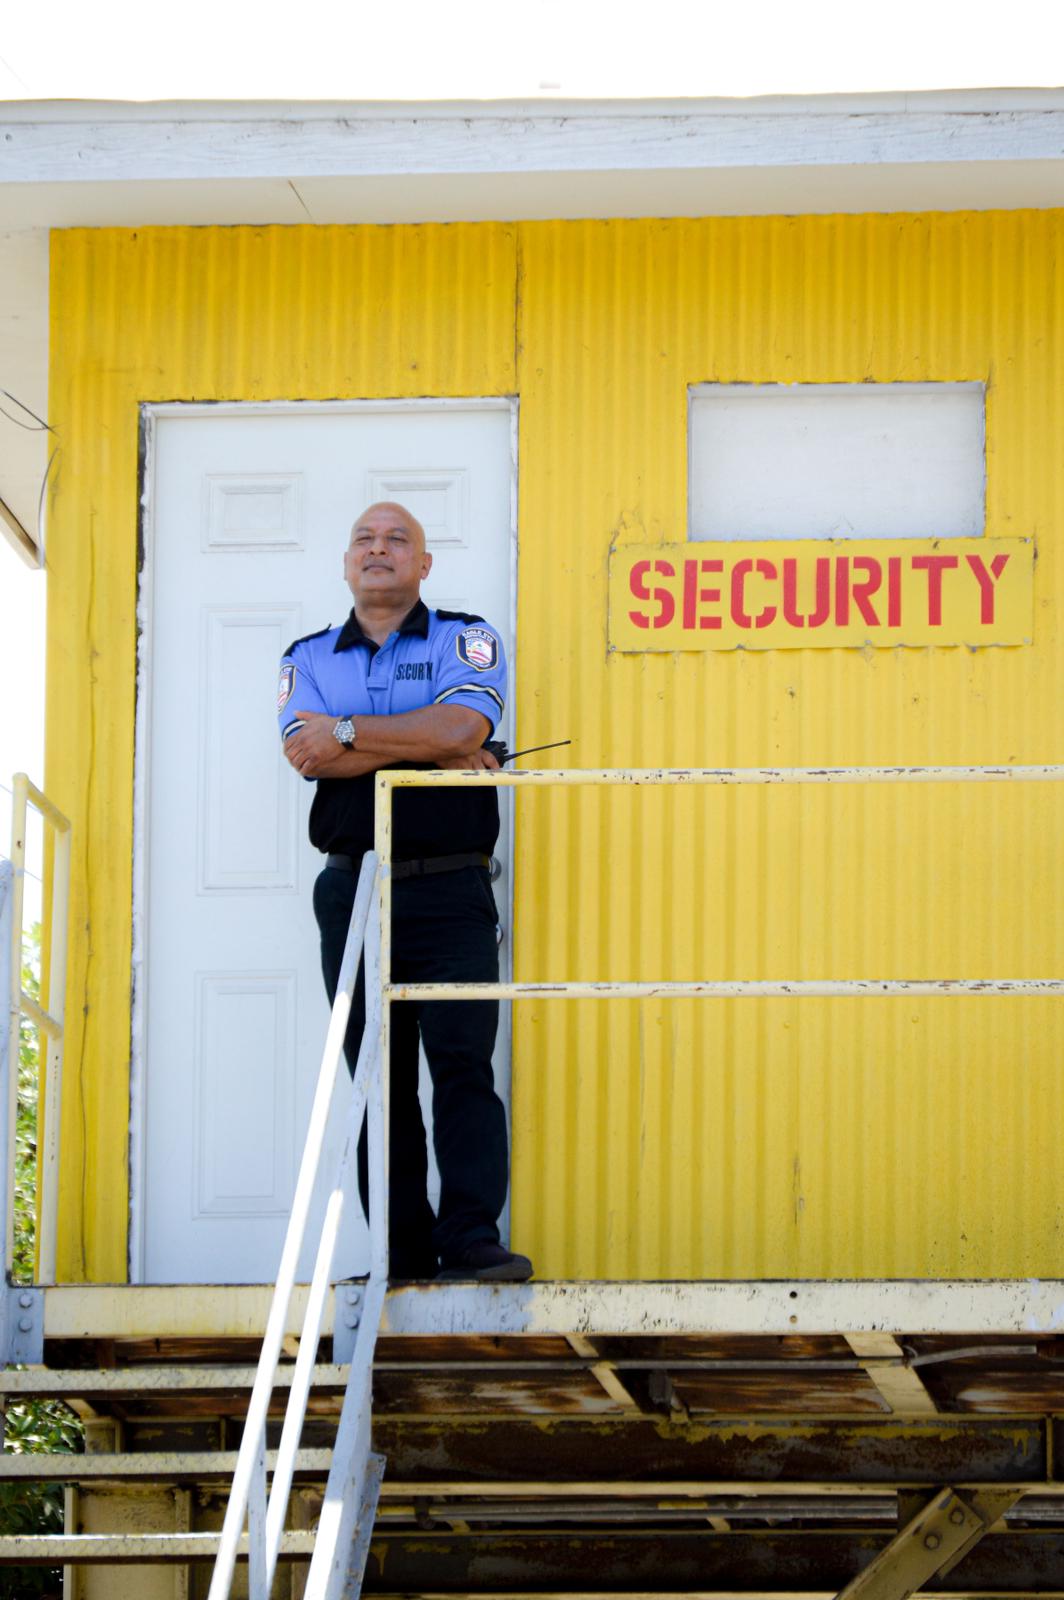 security guard services near me